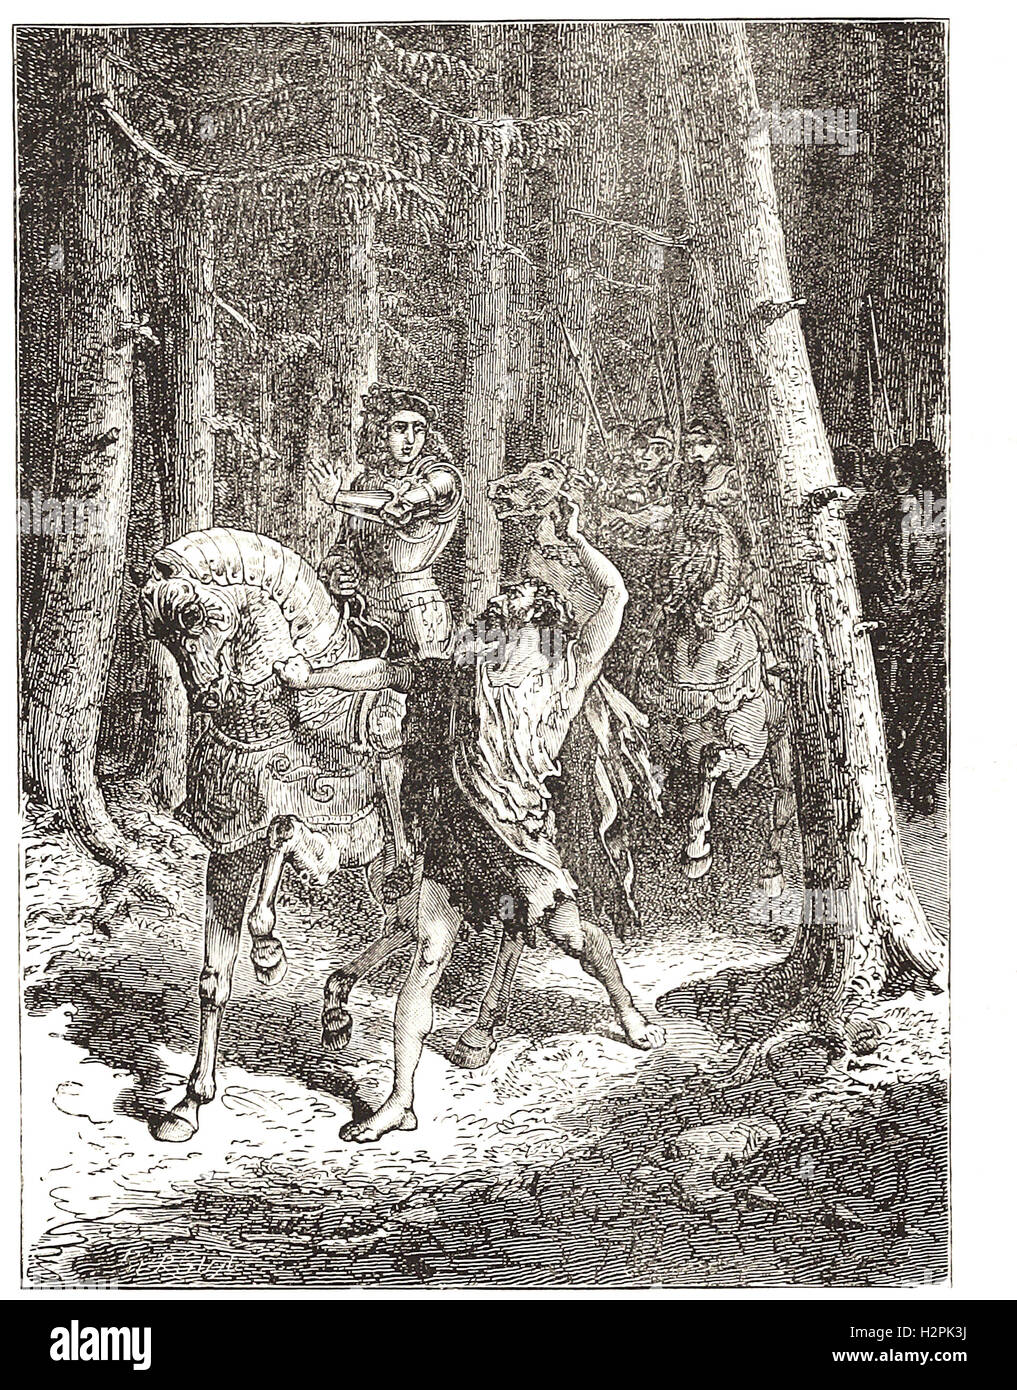 CHARLES VI. IN THE FOREST OF LE MANS. - from 'Cassell's Illustrated Universal History' - 1882 Stock Photo